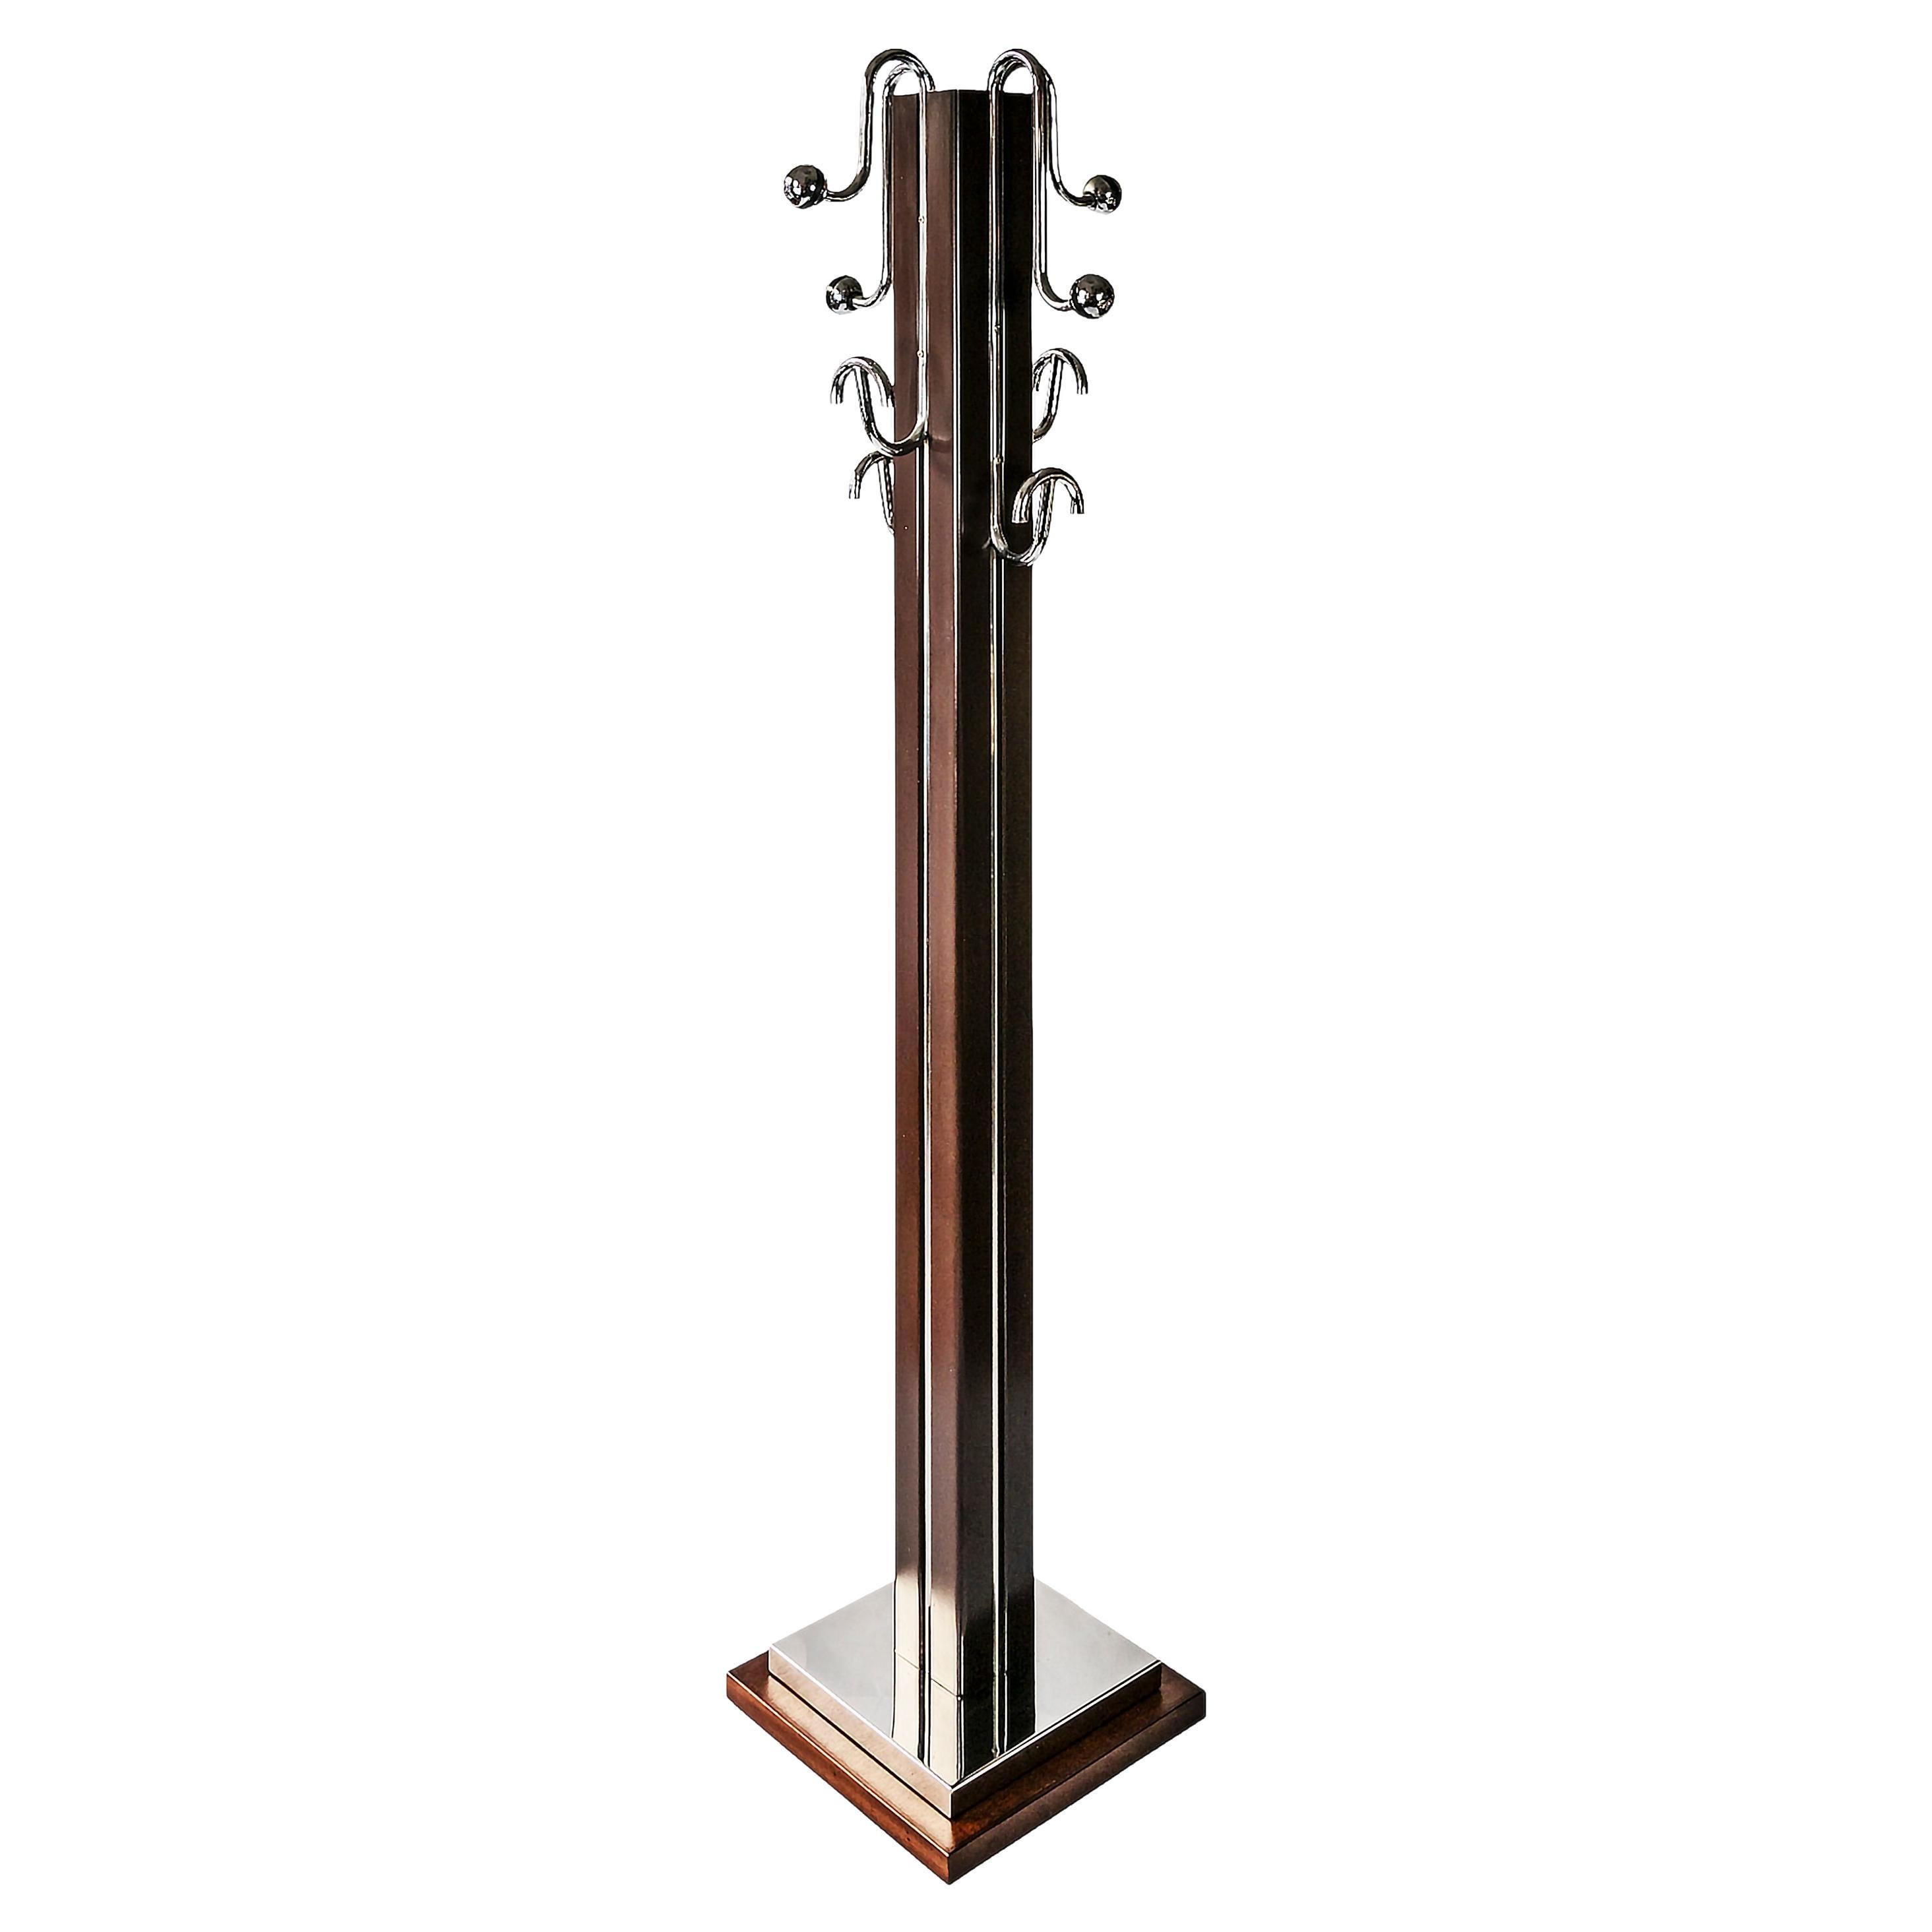 Mid-Century Italian coat rack/stand is made of wood and chrome metal details.
It's rectangular form base is wooden with the chrome frame.
The vertical body is in colored metal.
Heavy and stable.
Very good/excellent vintage condition.